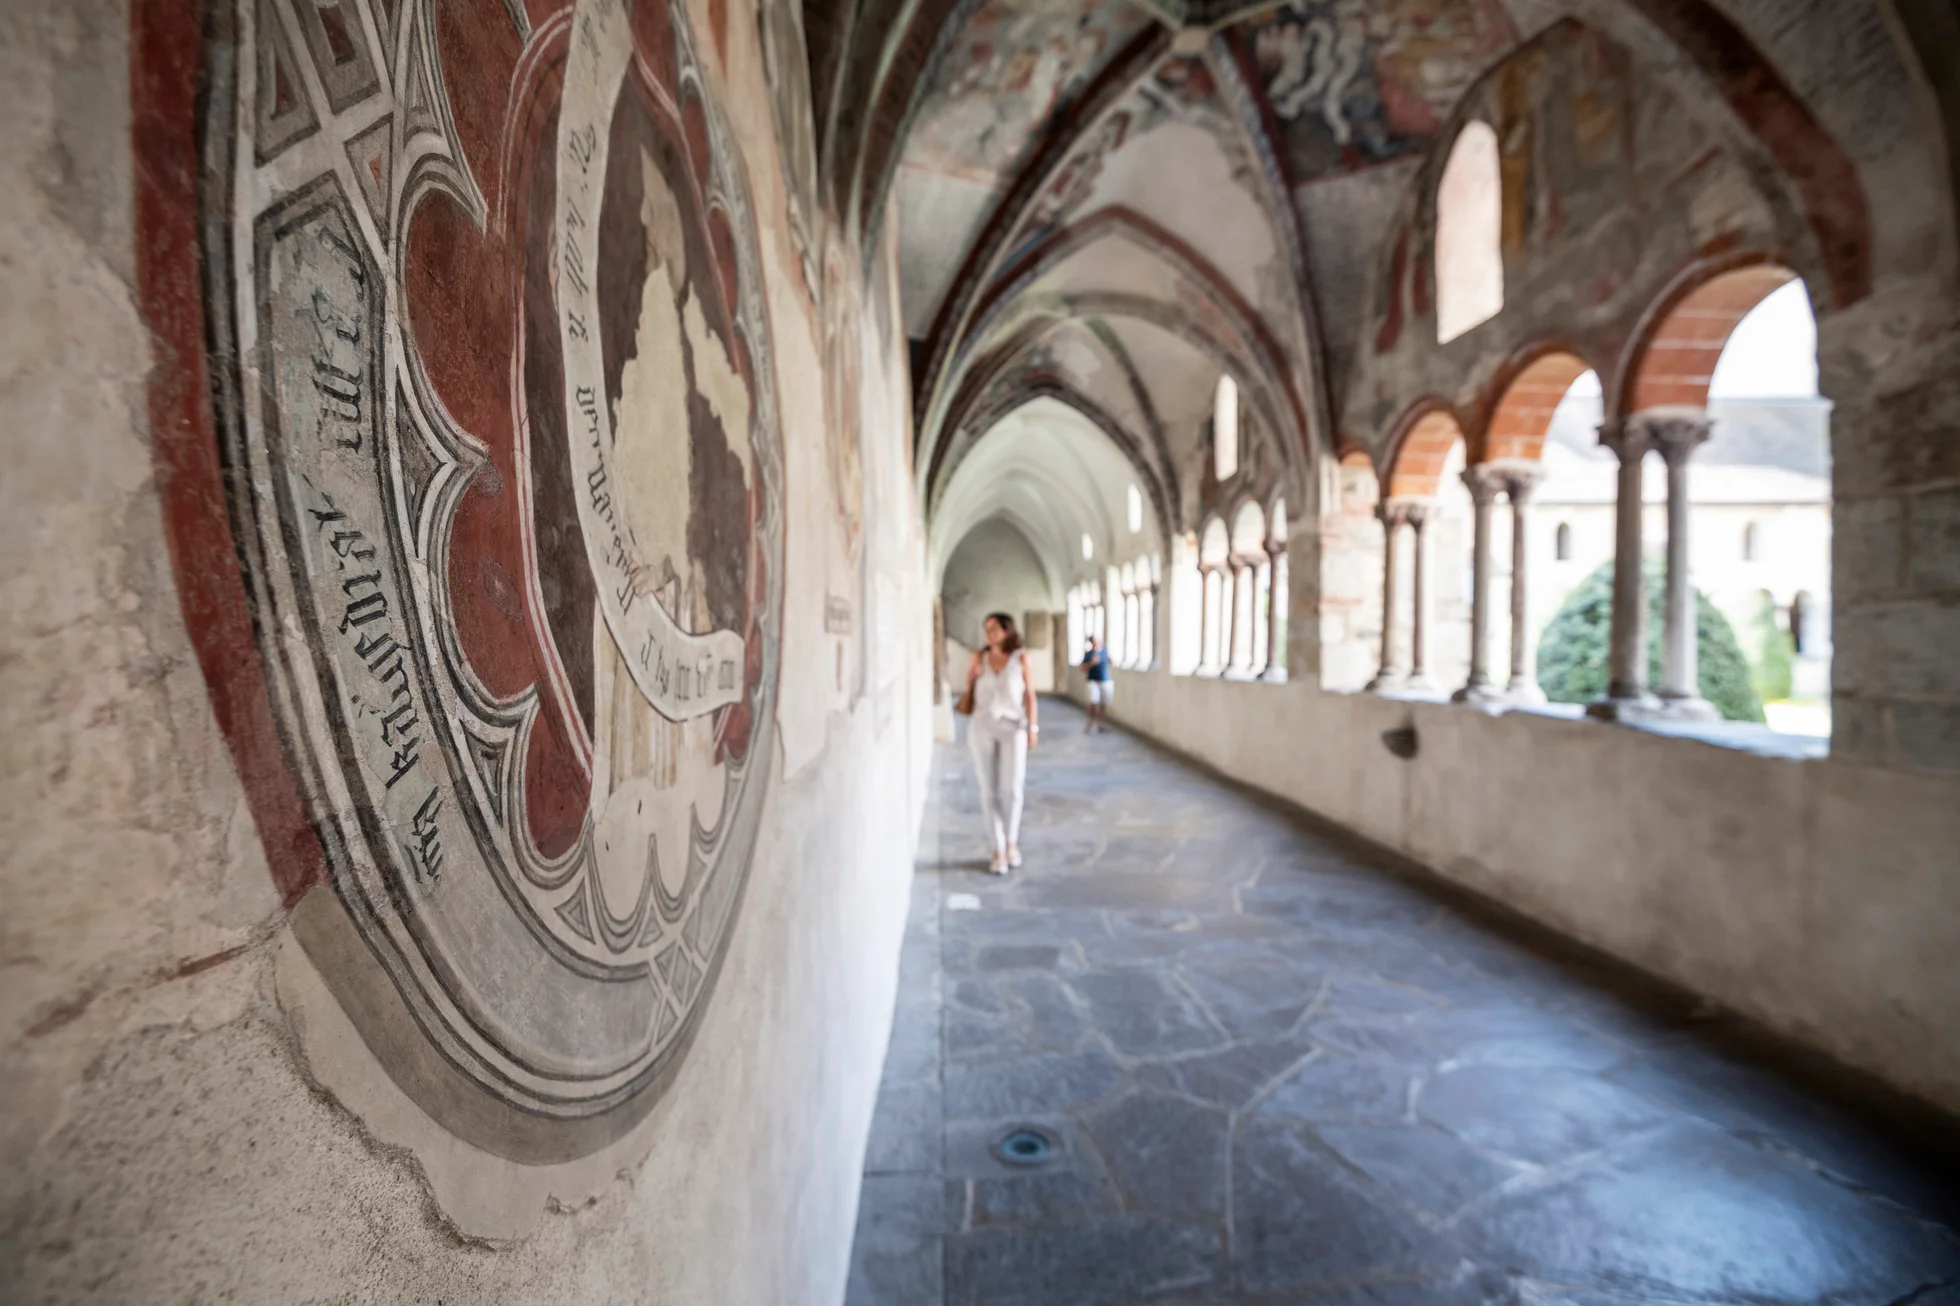 Frescoes from the 14th century adorn the cloister of Brixen Cathedral. A visitor is in the background.